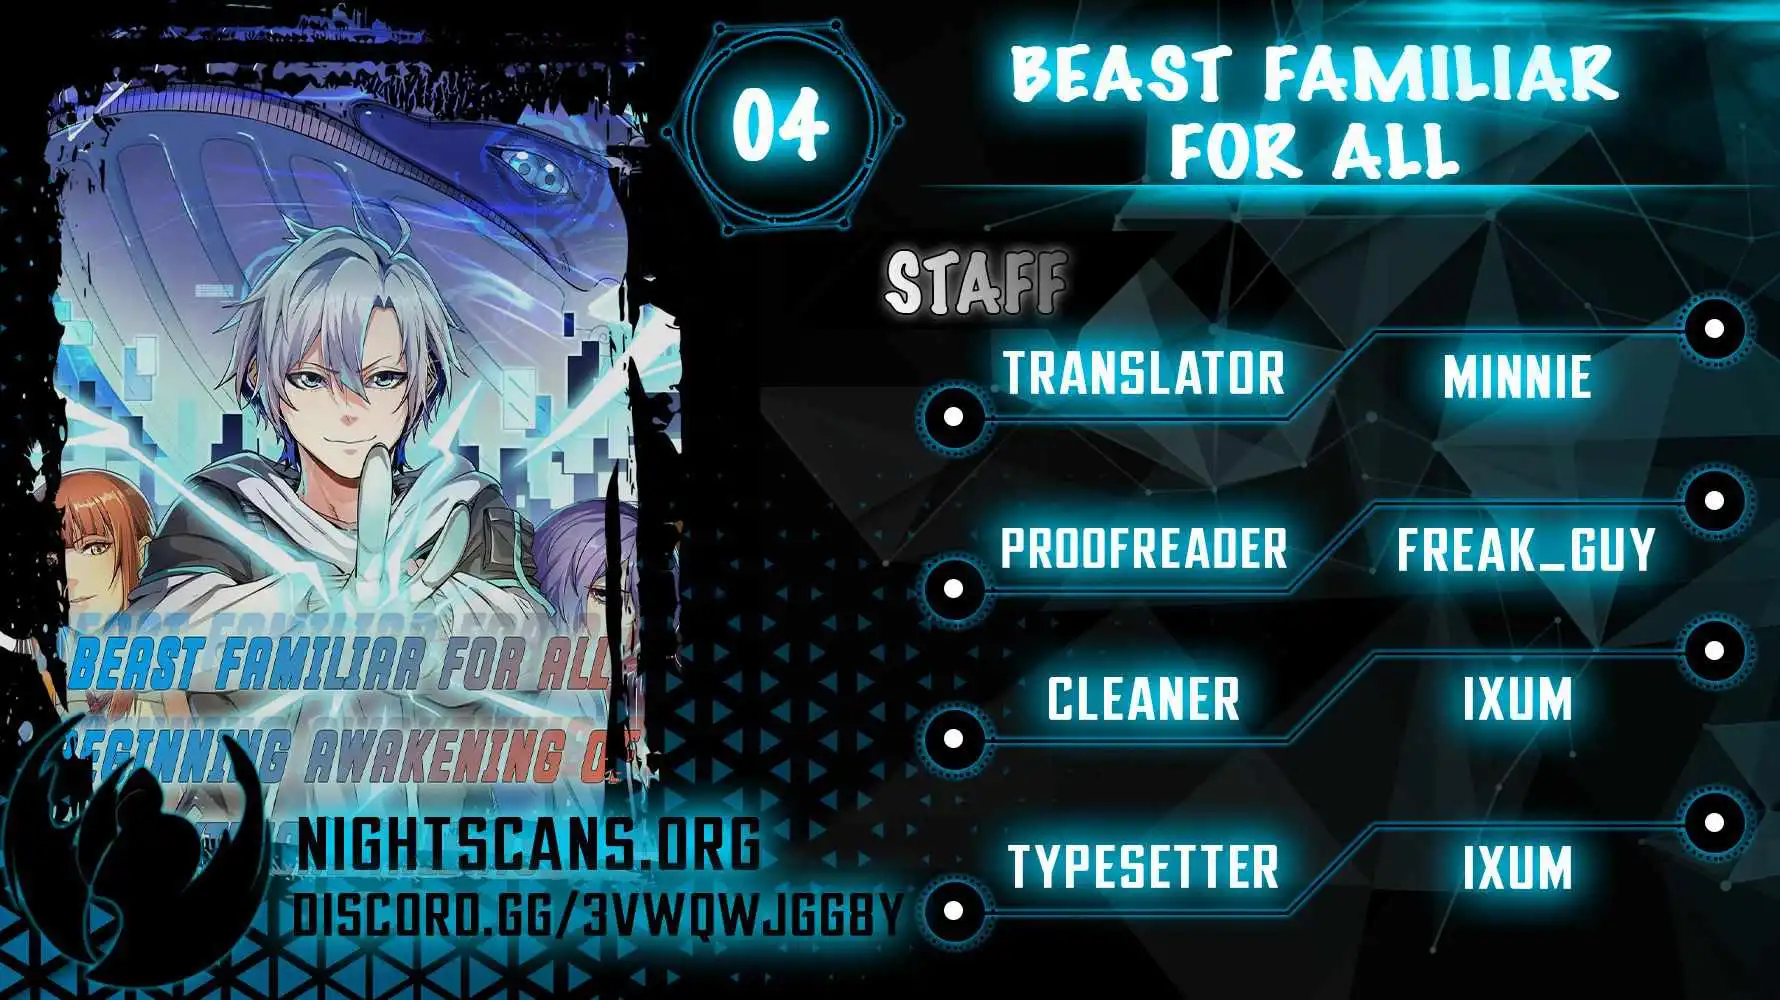 Beast Familiar for All: Beginning Awakening of Mythical Talents Chapter 4